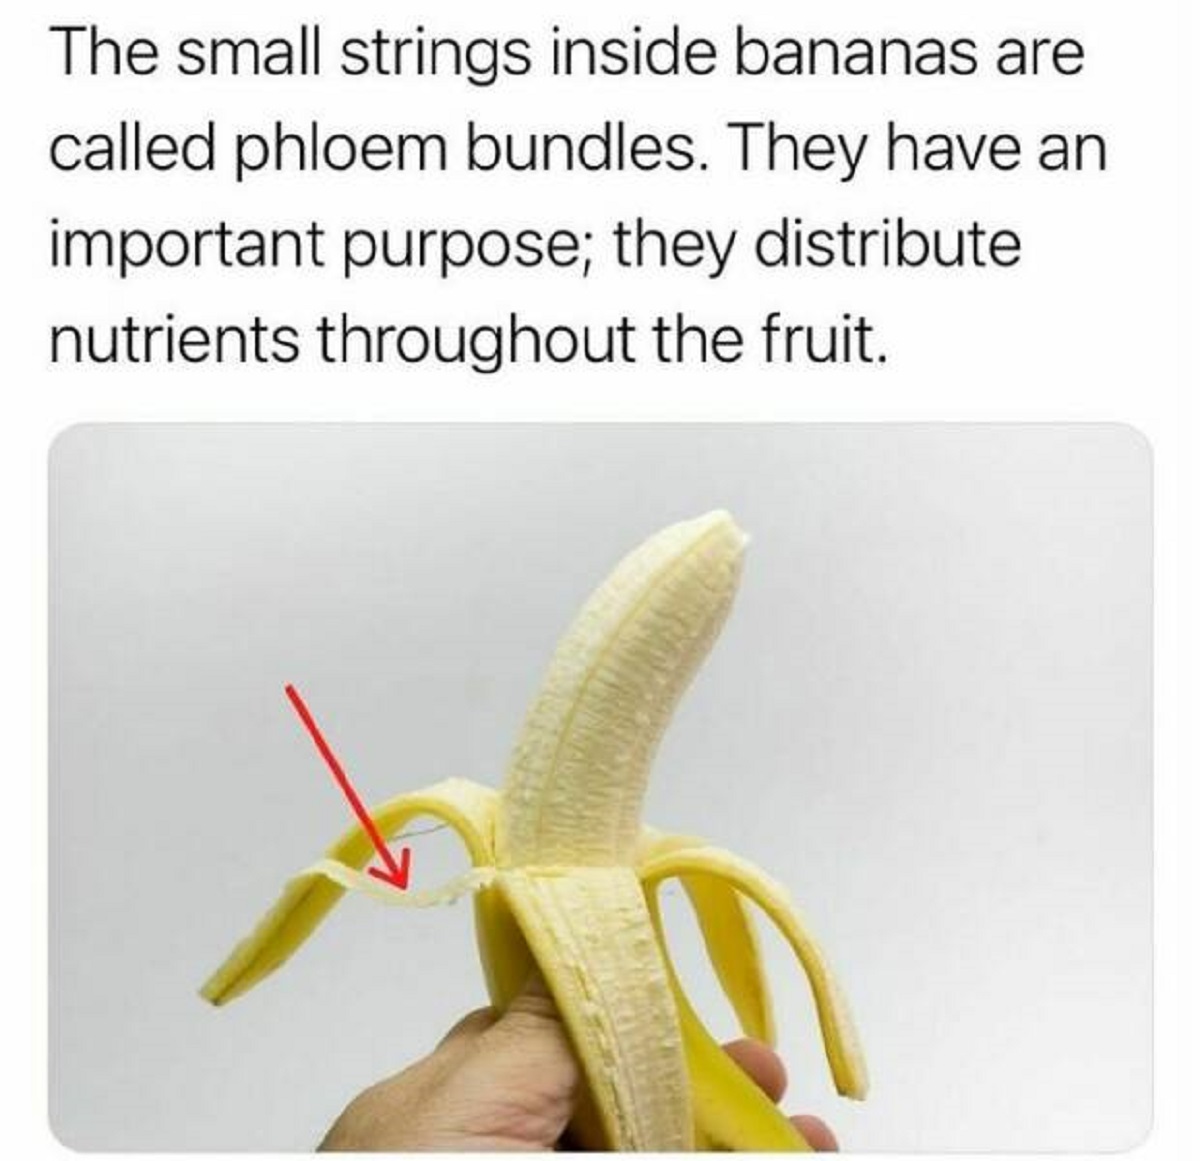 peel - The small strings inside bananas are called phloem bundles. They have an important purpose; they distribute nutrients throughout the fruit.